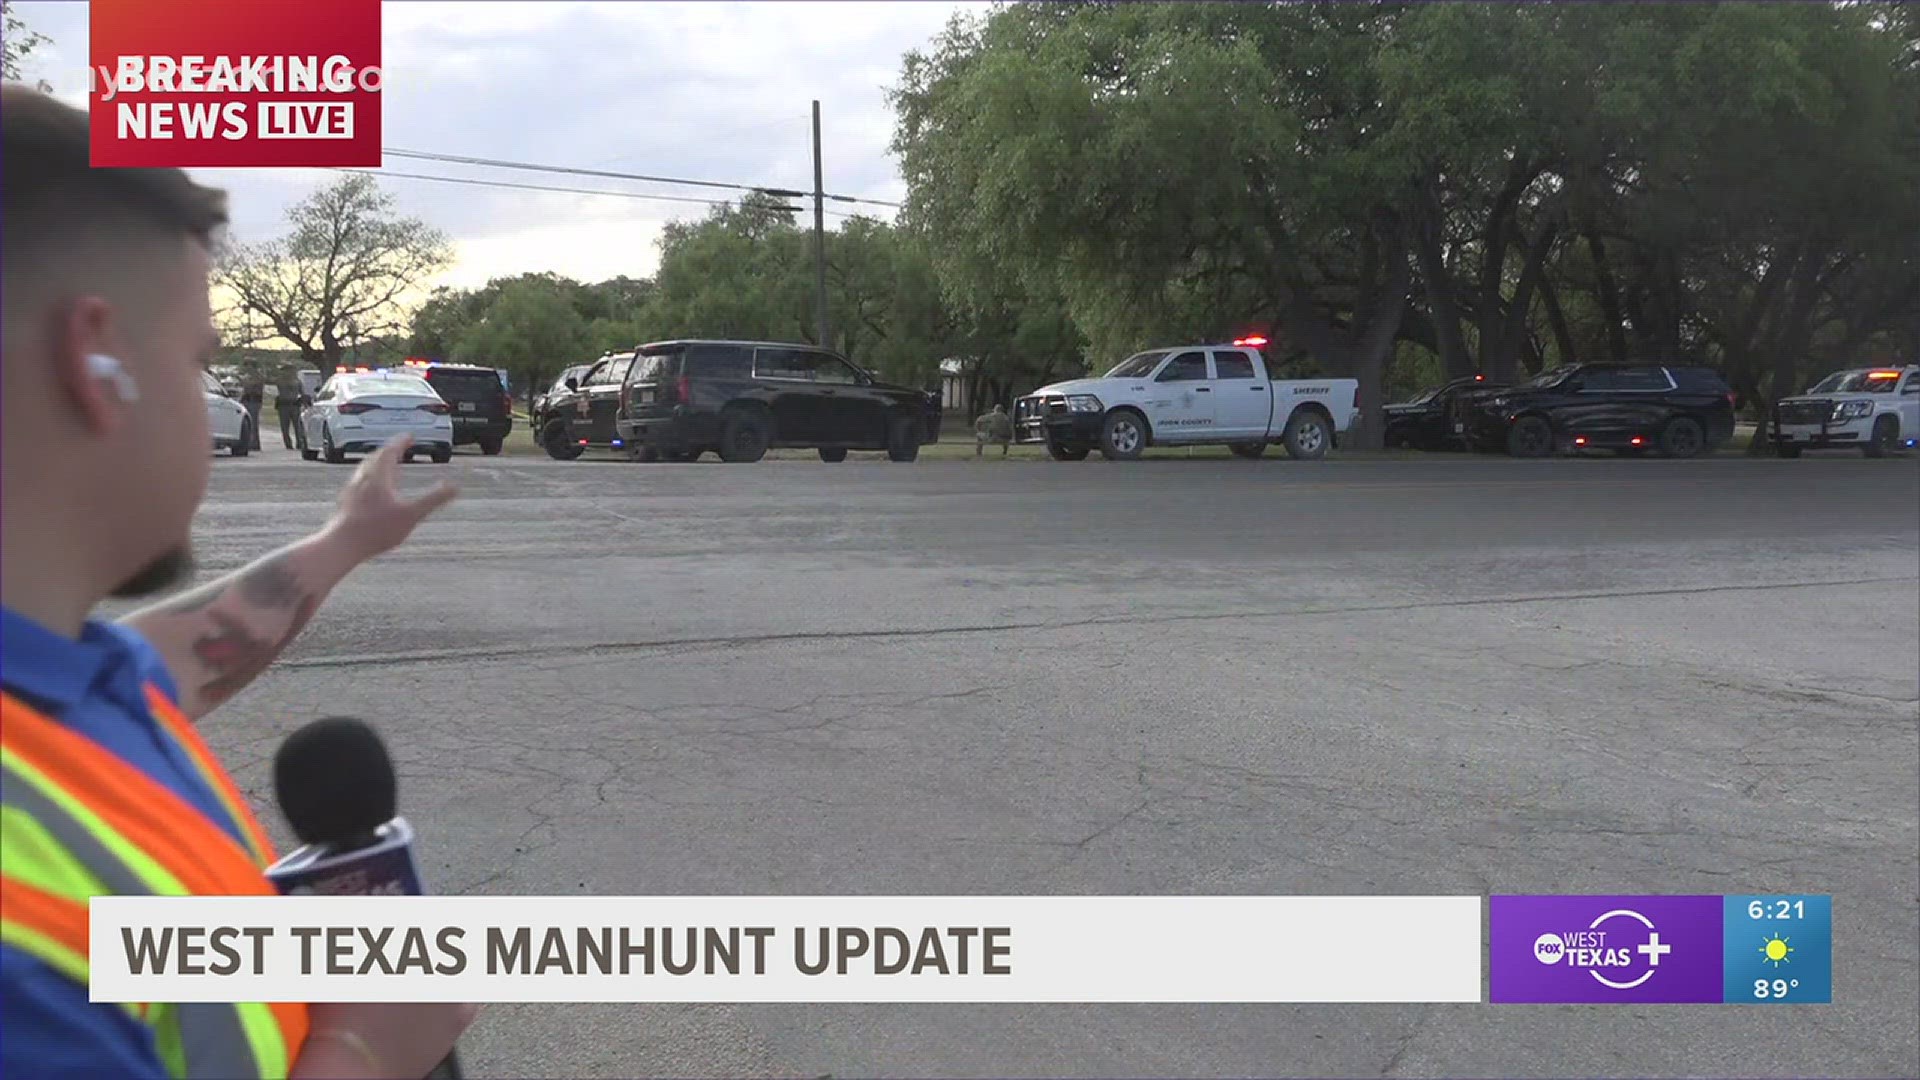 Our Damien Bartonek was live in Mertzon covering the heavy police presence in connection to the Odessa homicide suspect.